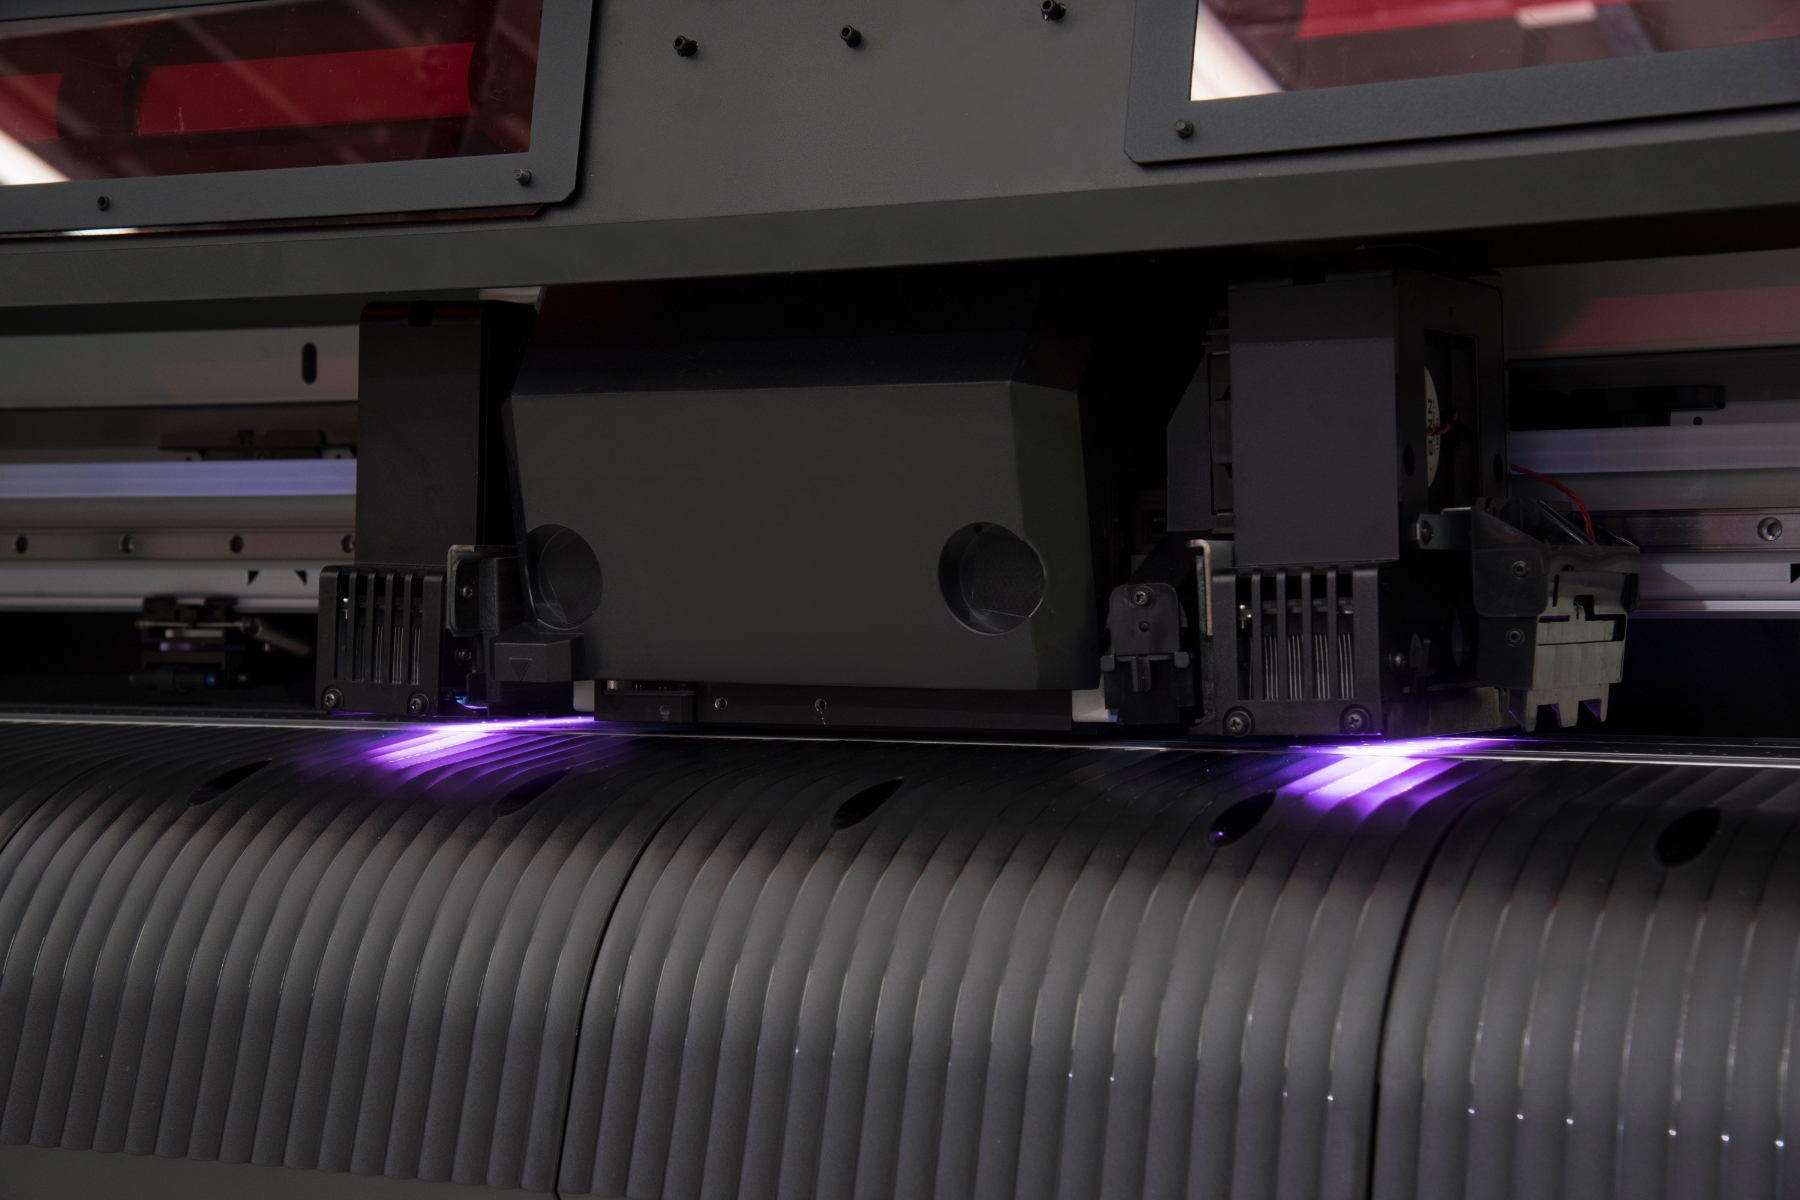 Mimaki LED UV printers enable printing to almost any material with their low energy, cold cure technology.